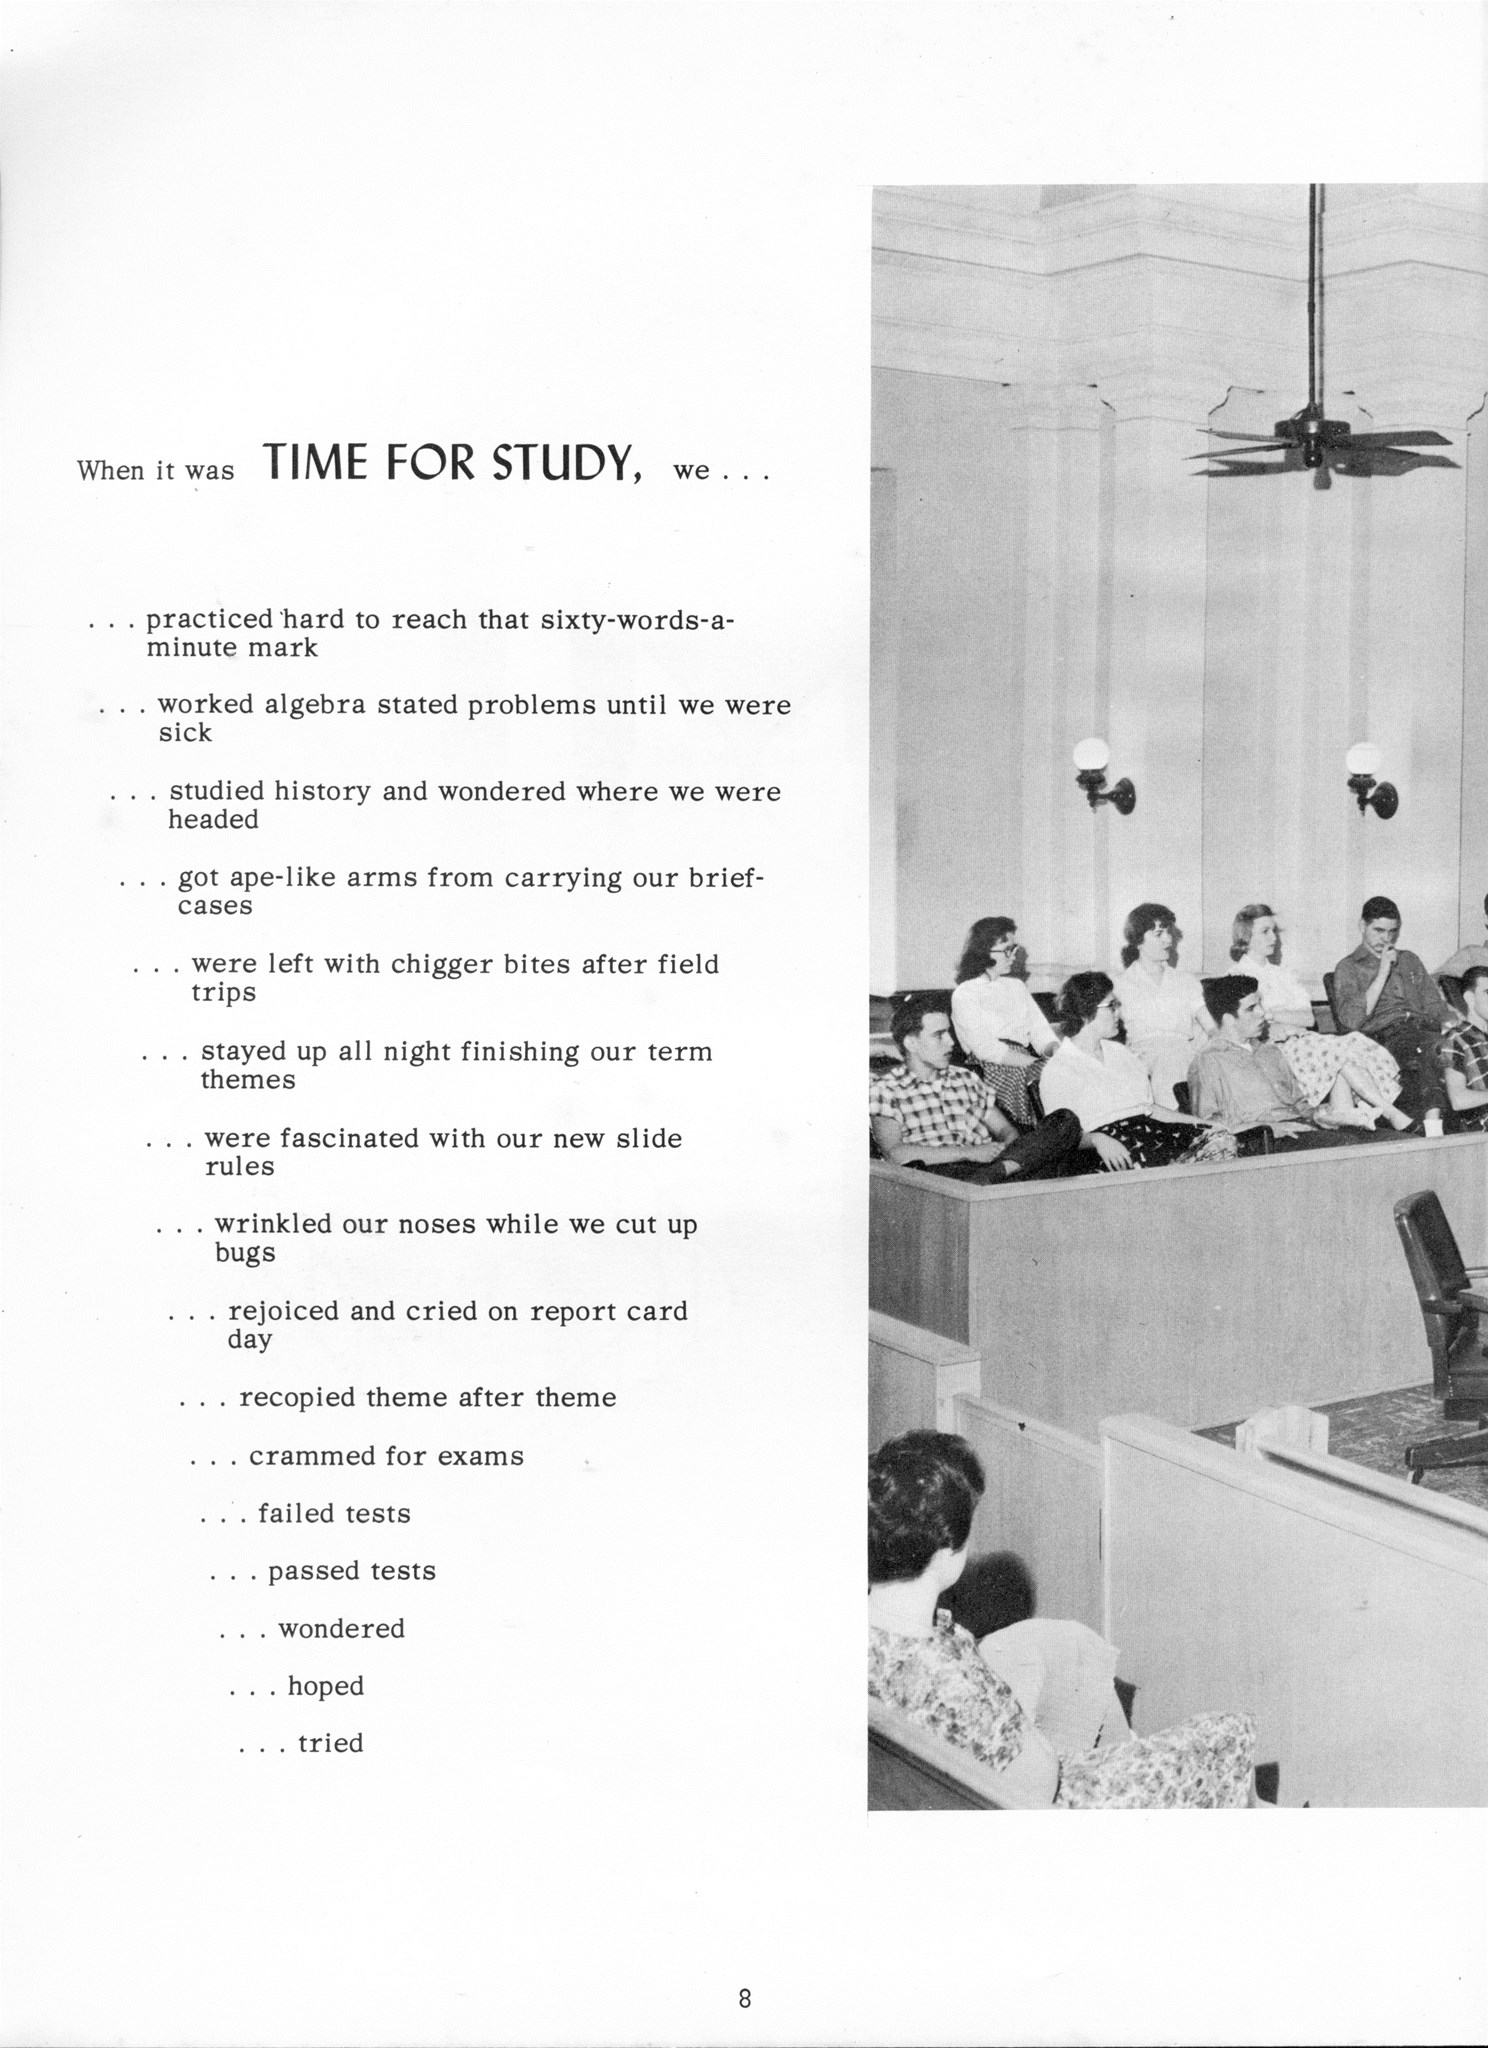 ../../../Images/Large/1960/Arclight-1960-pg0008.jpg